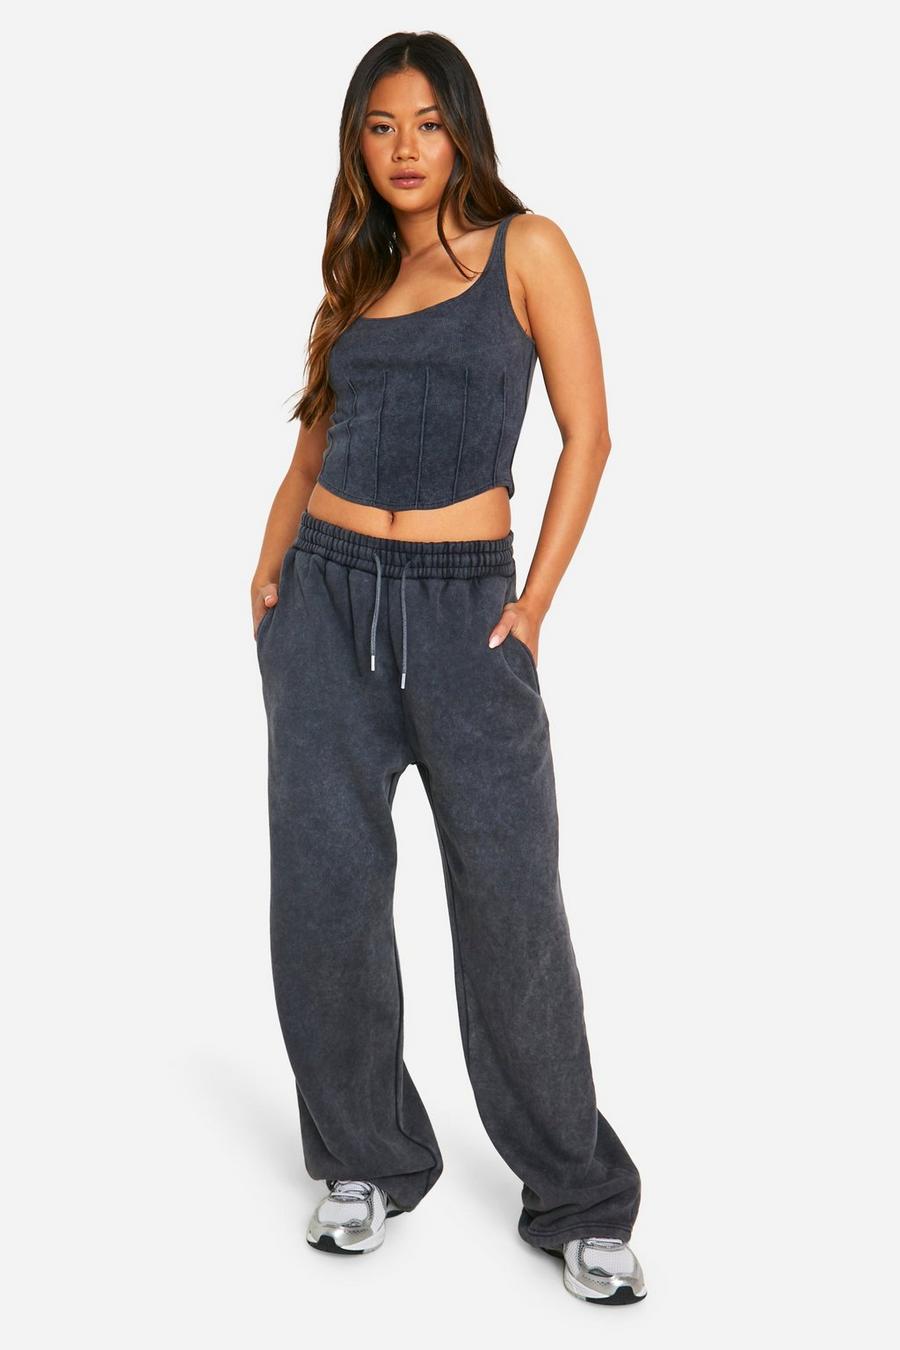 Charcoal Washed Seam Detail Corset Top And Straight Leg Jogger Set